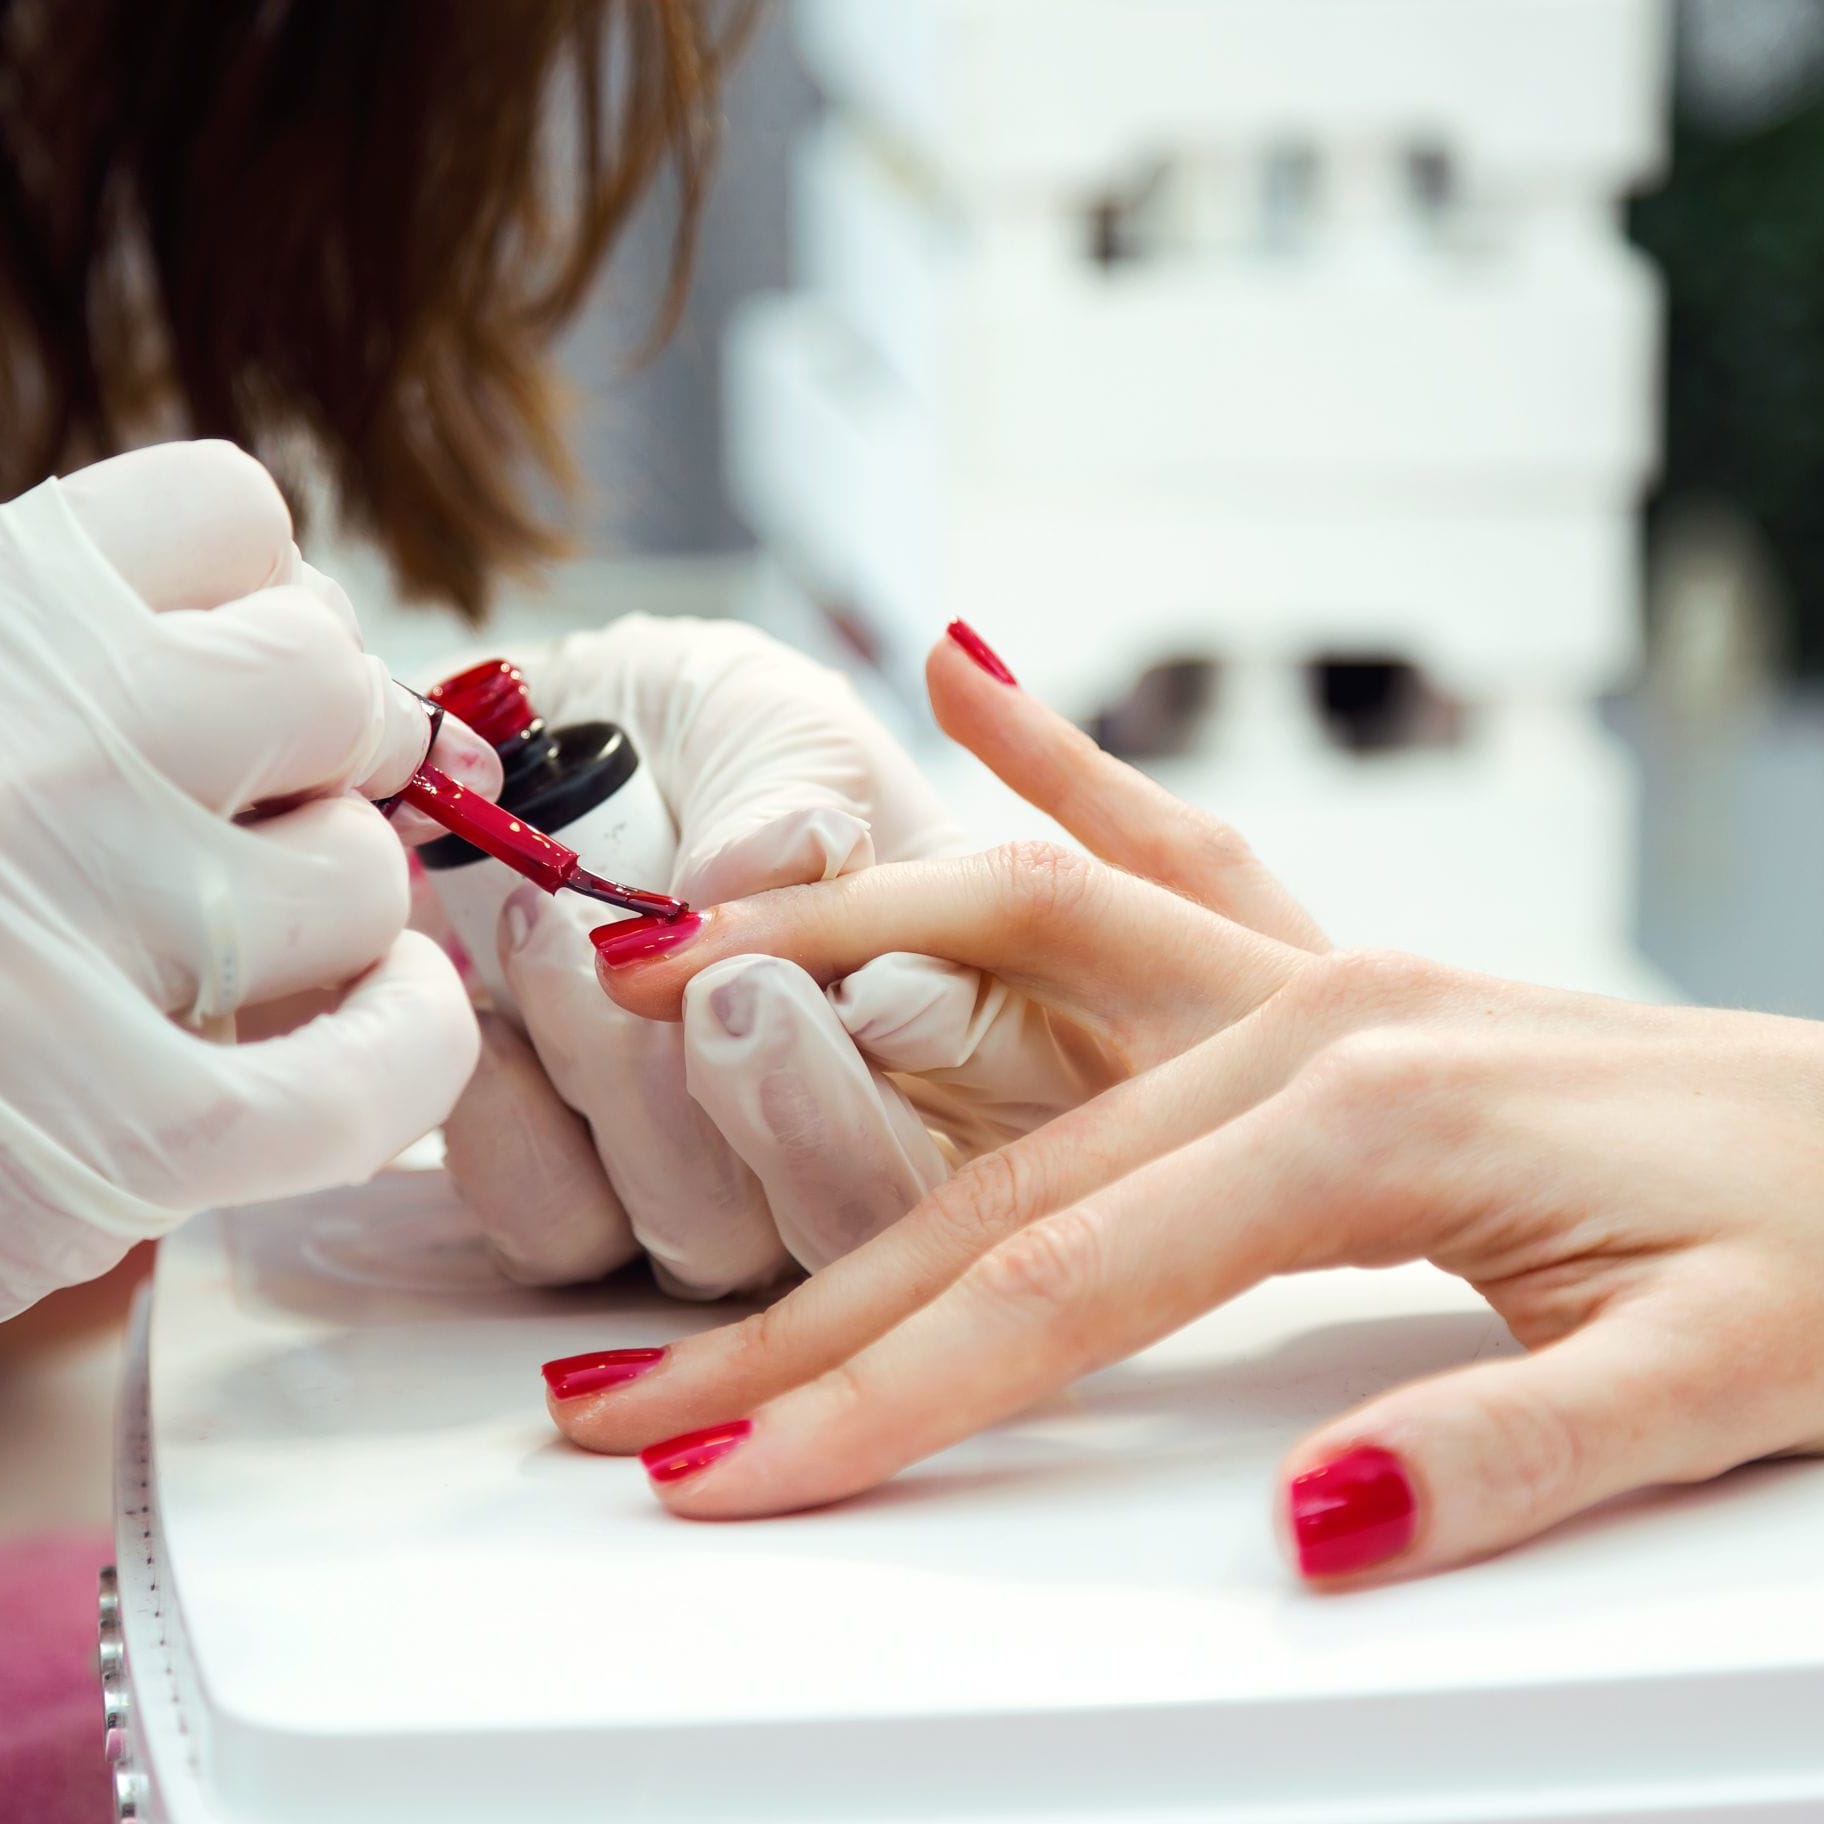 Classic Manicure and Pedicure with Foot Soak (2 Sessions) at Belle Lady - Get Deals, Cashback and Rewards with ShopBack GO